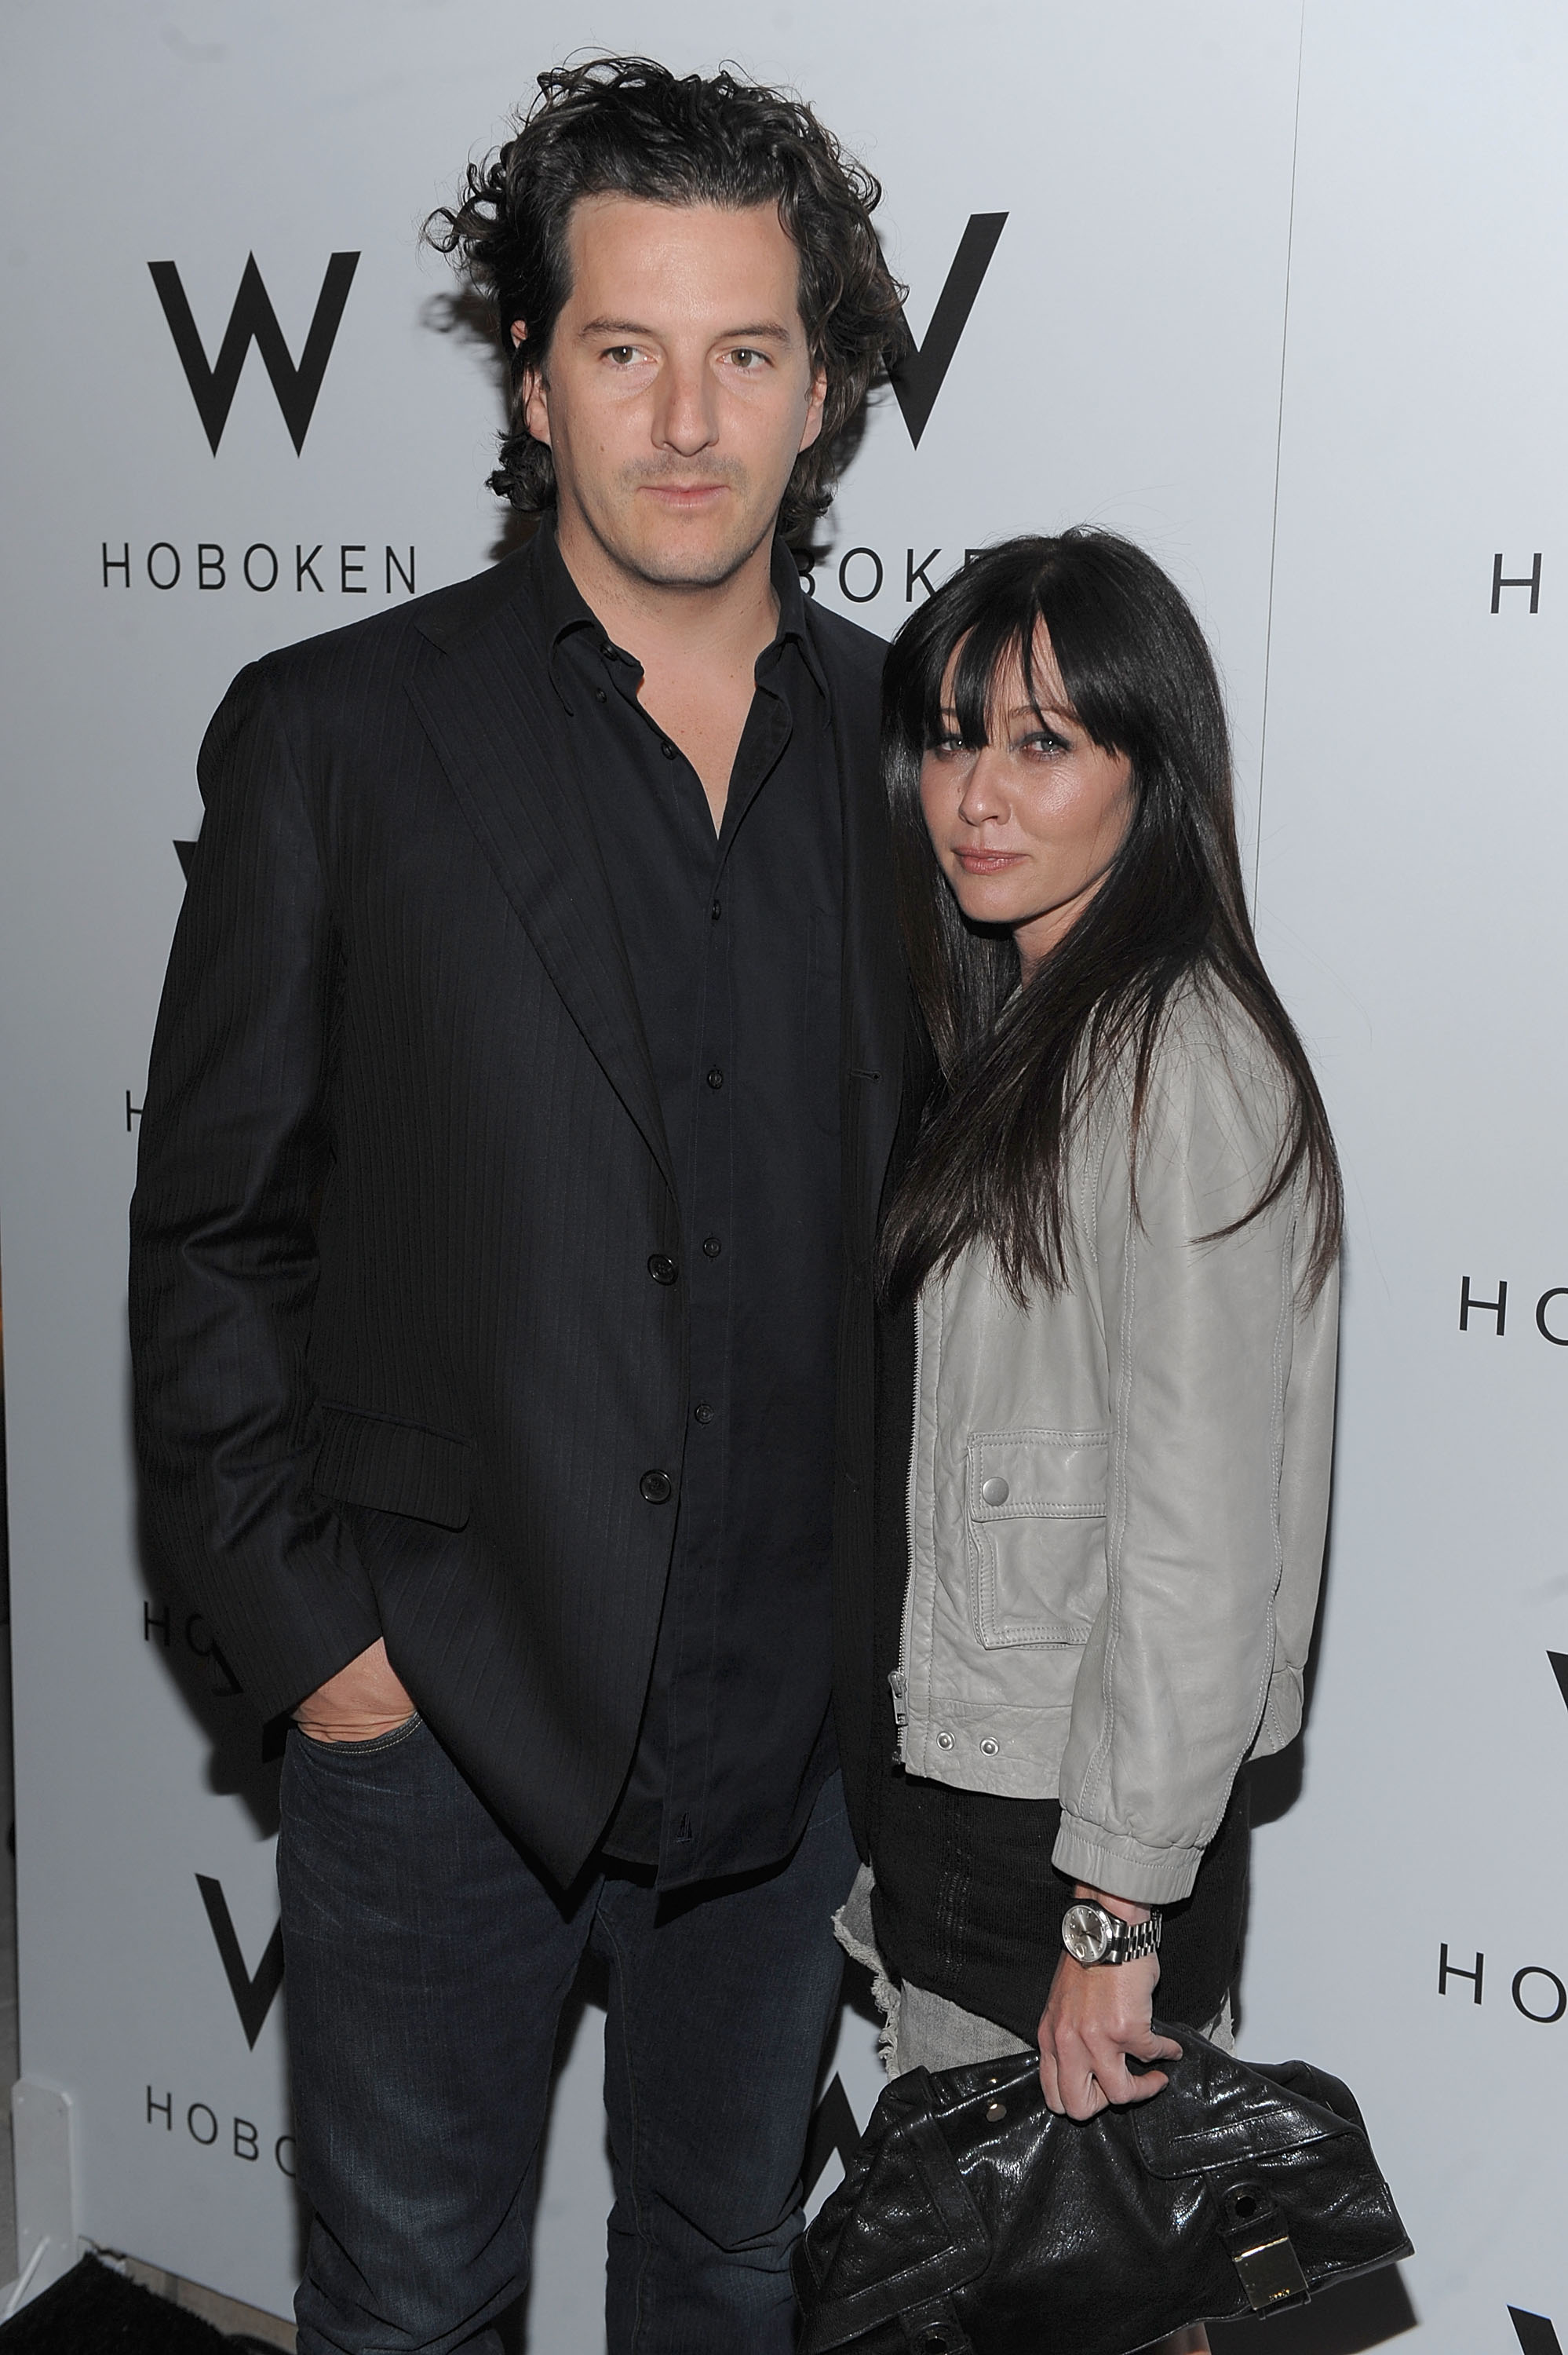 Shannen Doherty and Kurt Iswarienko attend the grand opening celebration of W Hoboken in New York City on April 23, 2009 | Source: Getty Images